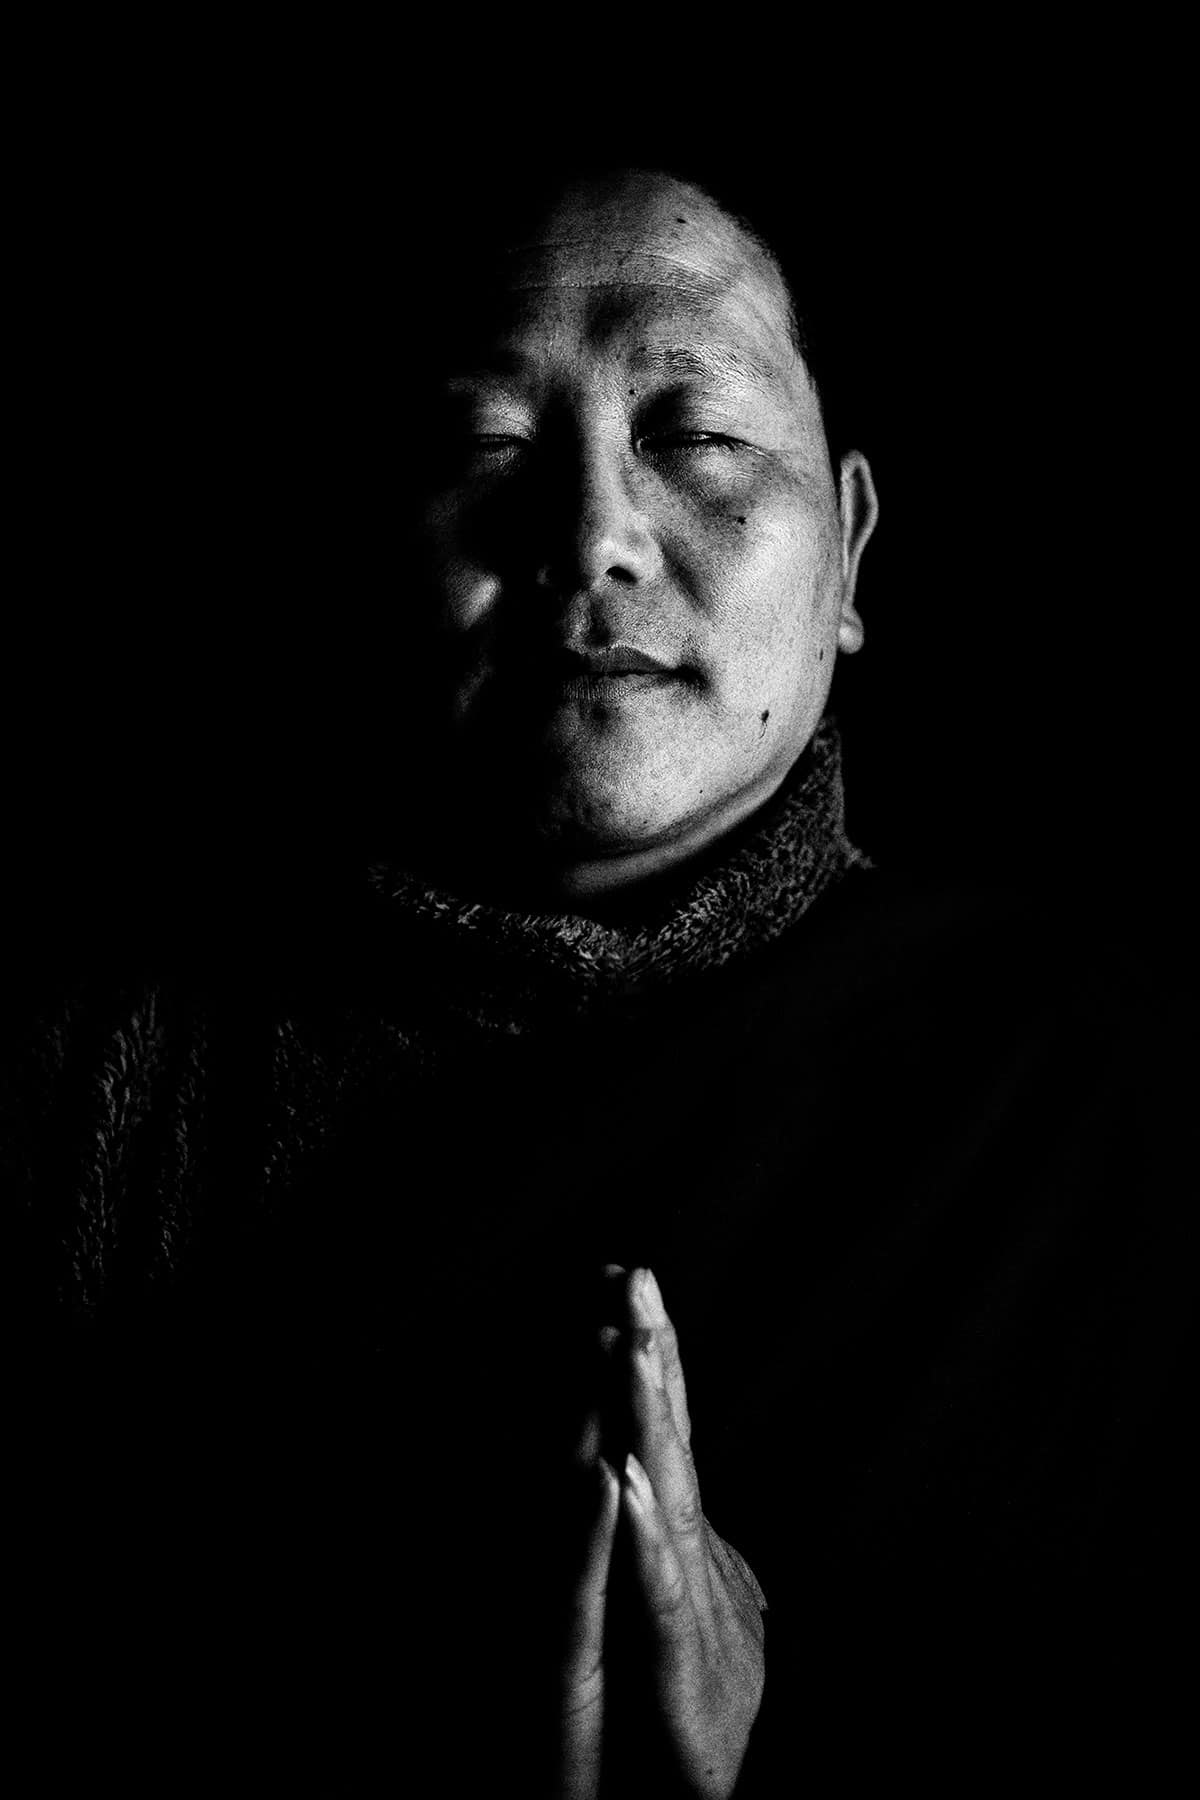 Eyes Closed Portrait of a Bhutanese Monk: Black and White Portrait Photography by Jean Tran and Élysée Lang